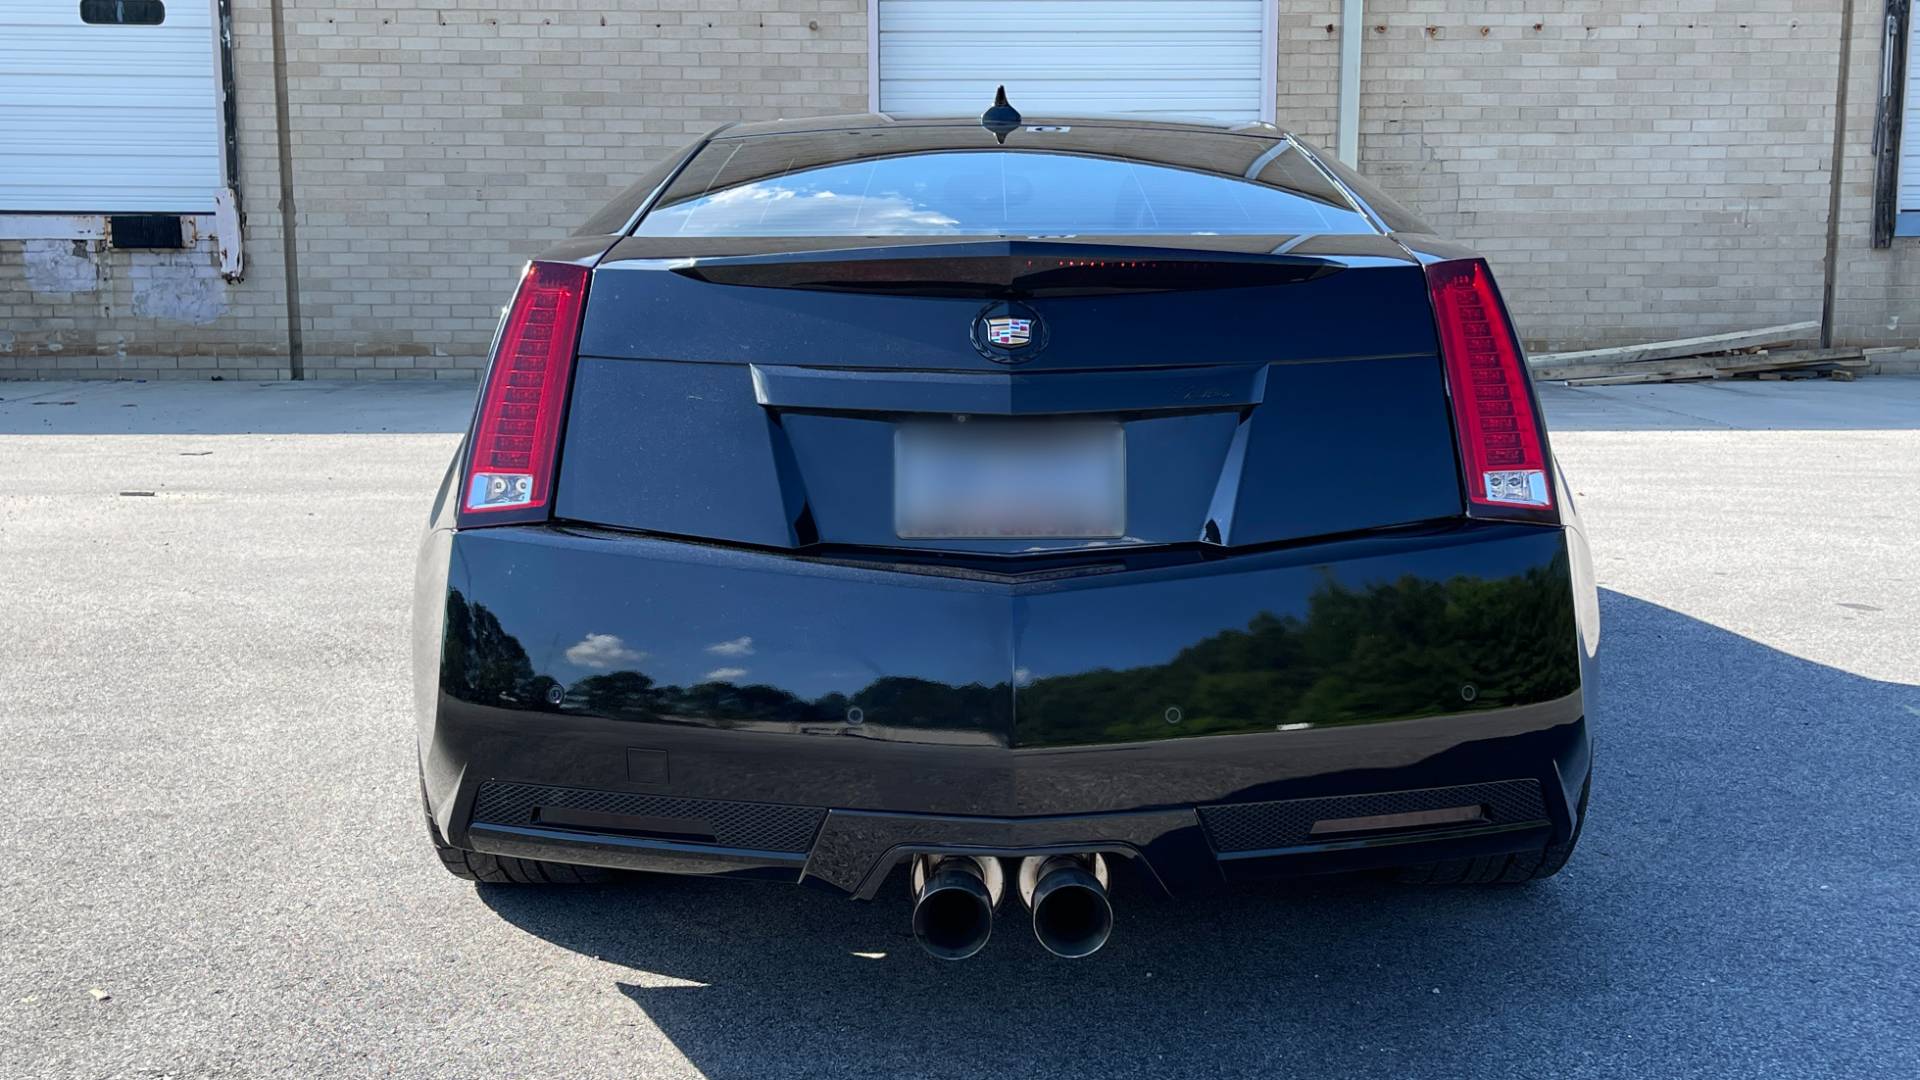 Used 2011 Cadillac CTS-V COUPE 6.2L 600HP+ / NAV / BOSE / SUNROOF / RECARO / 19IN WHLS / REARVIEW for sale Sold at Formula Imports in Charlotte NC 28227 11